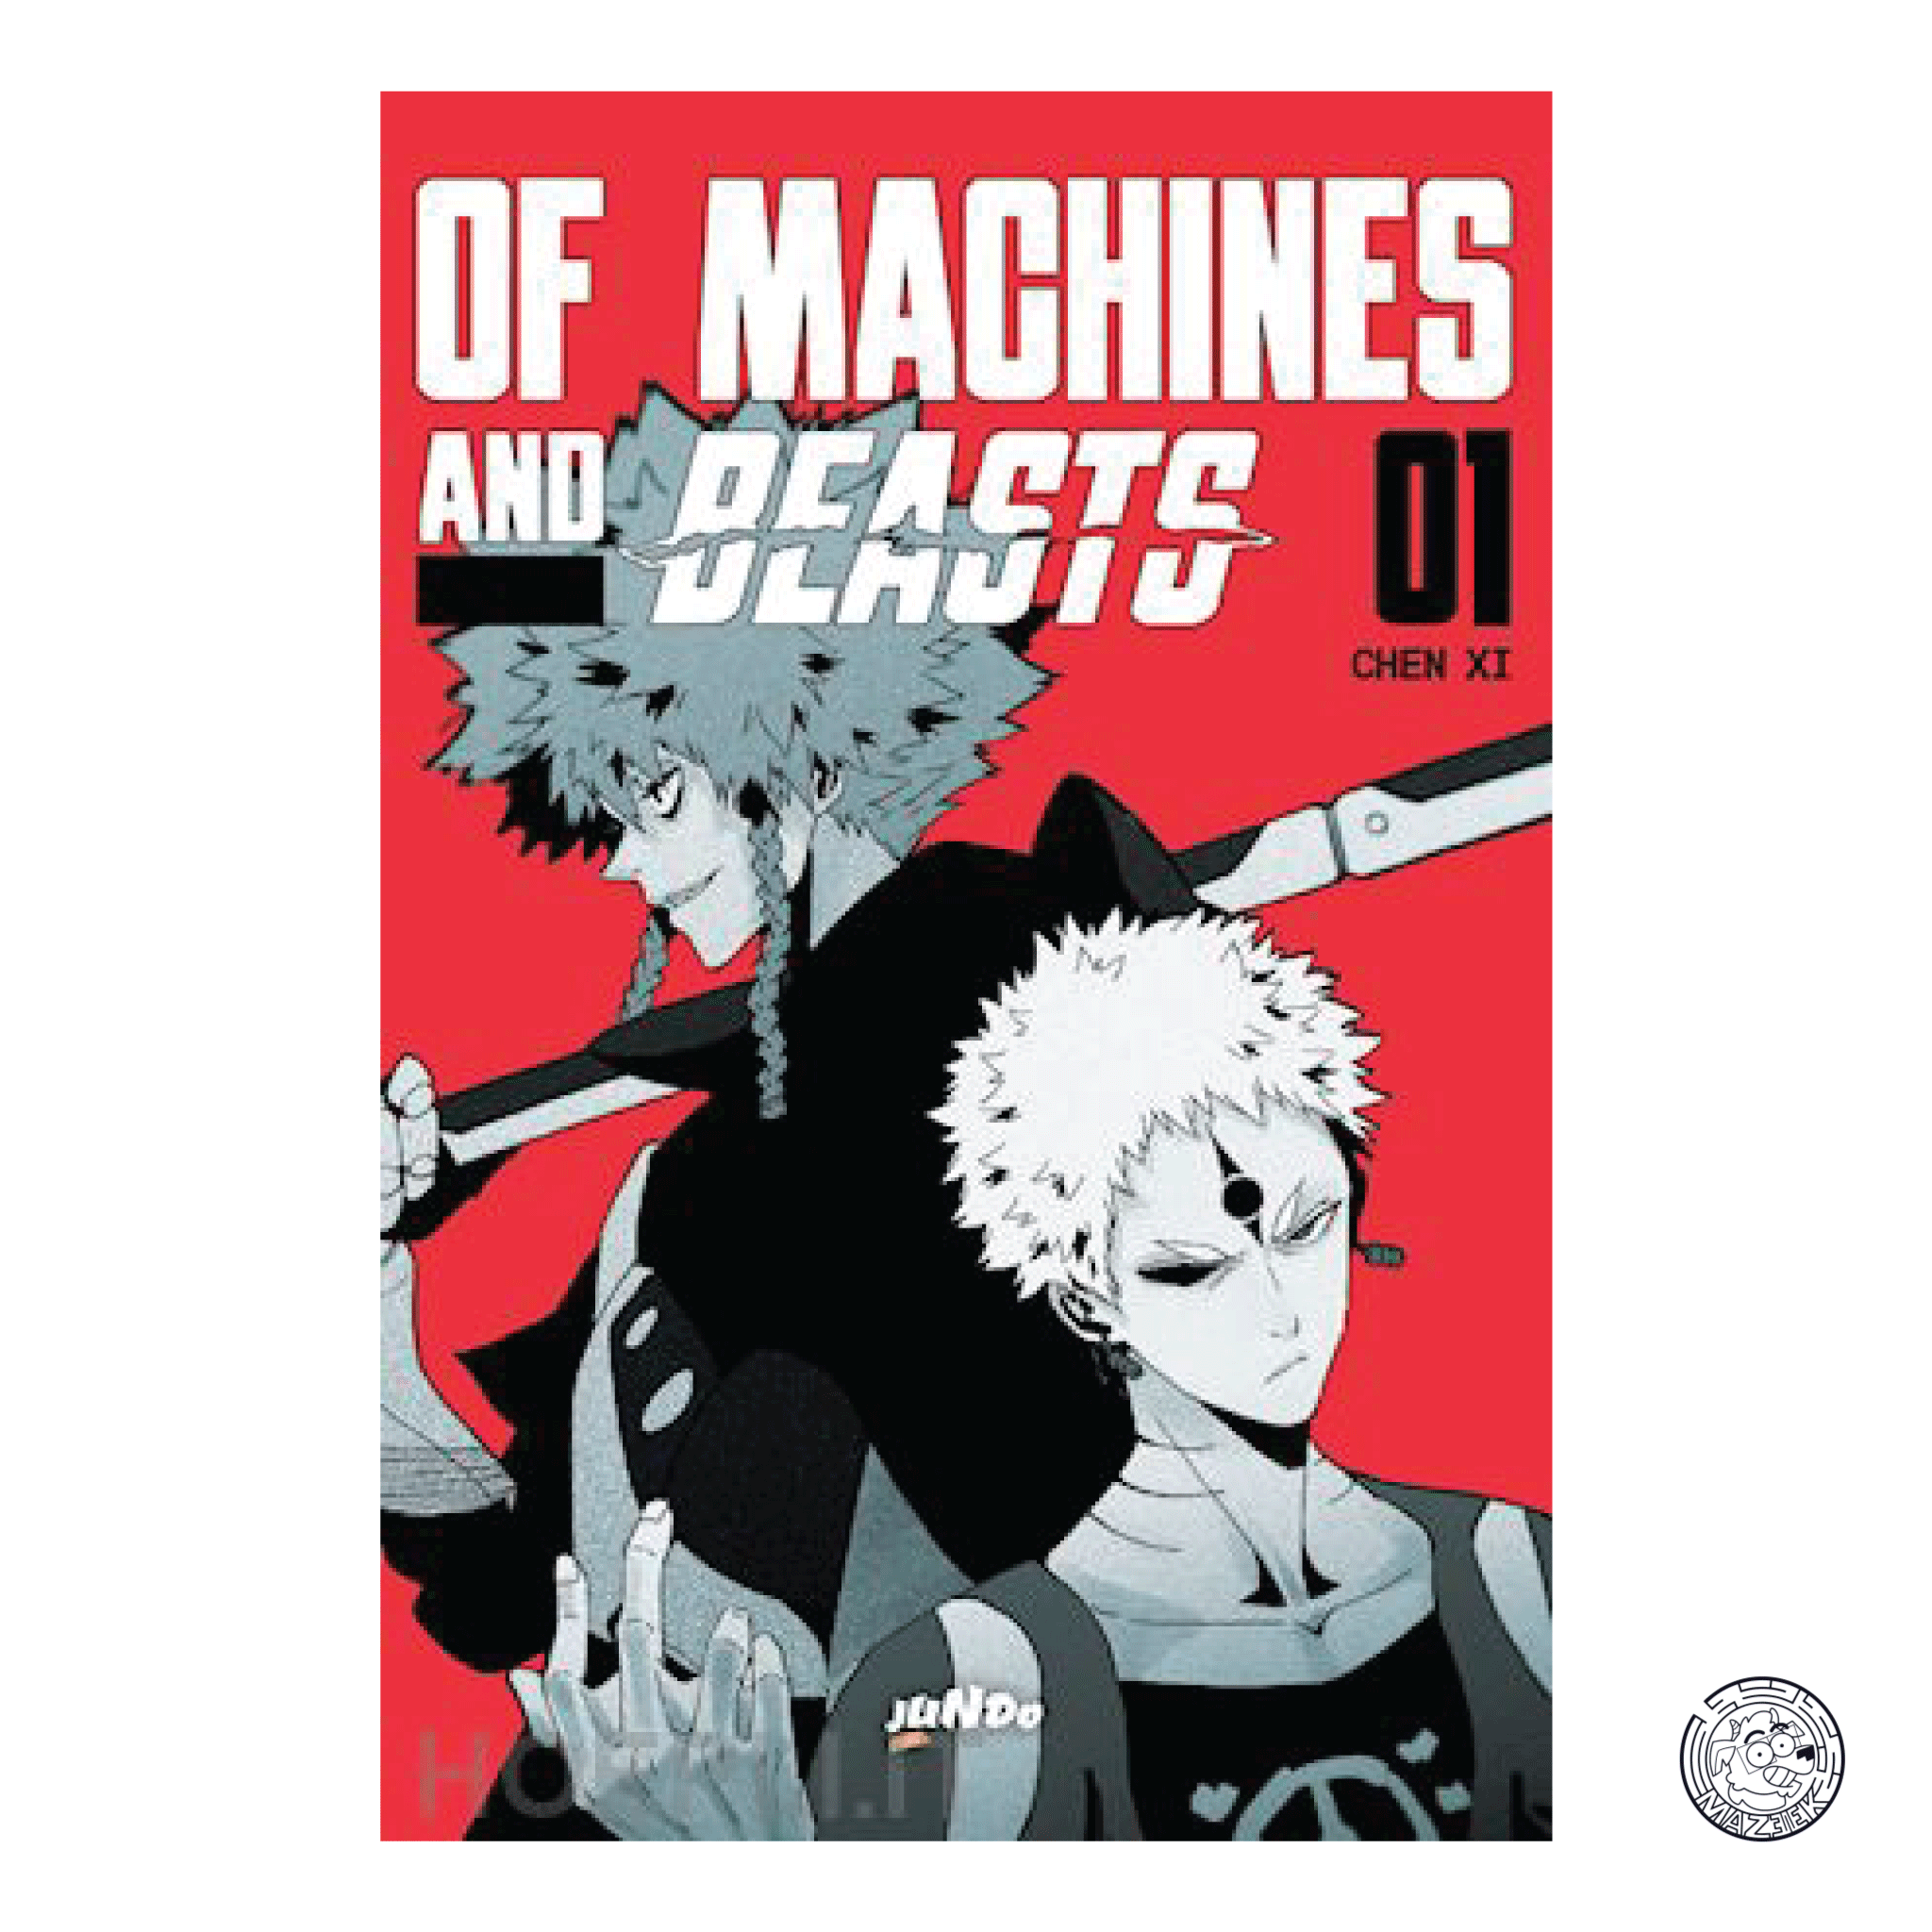 Of Machines And Beasts 01